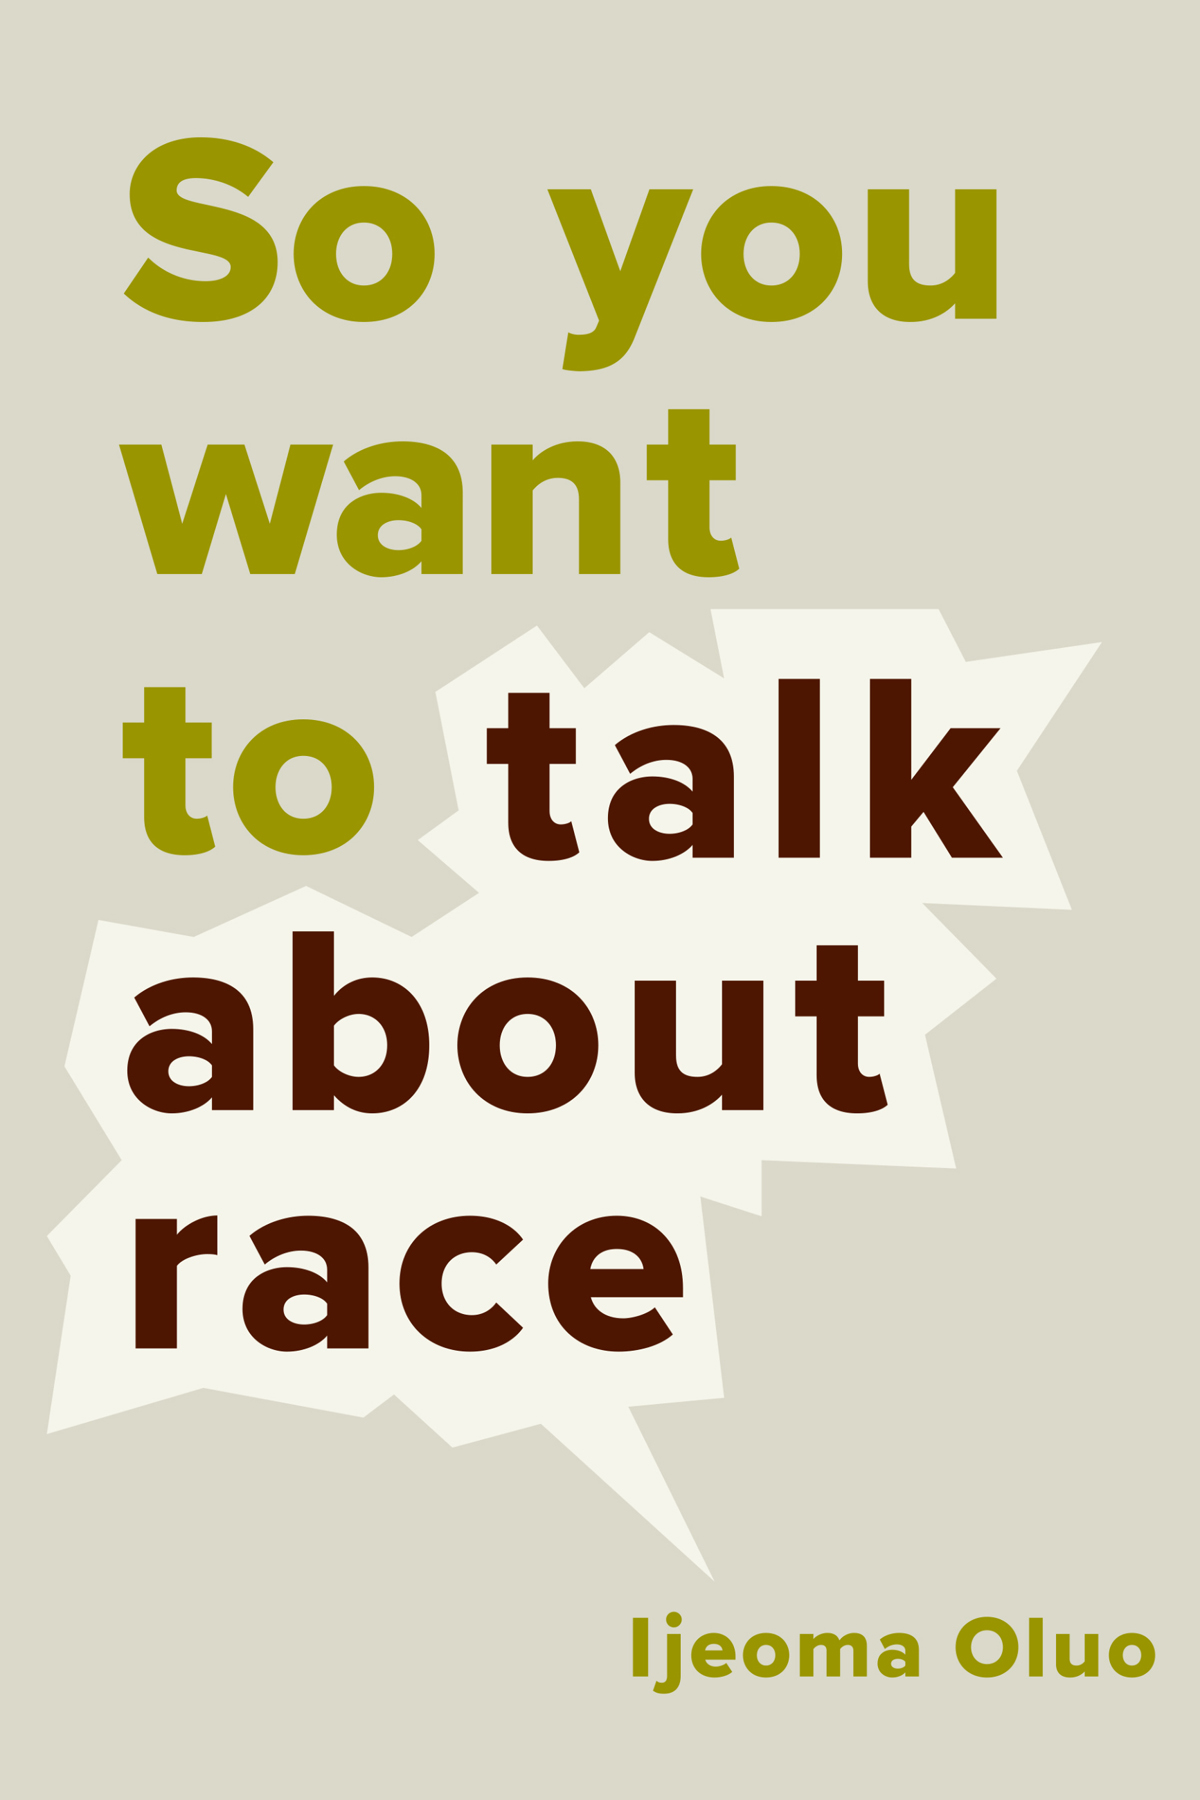 Ijeoma Oluo: So You Want to Talk about Race (EBook, 2018, Seal Press)